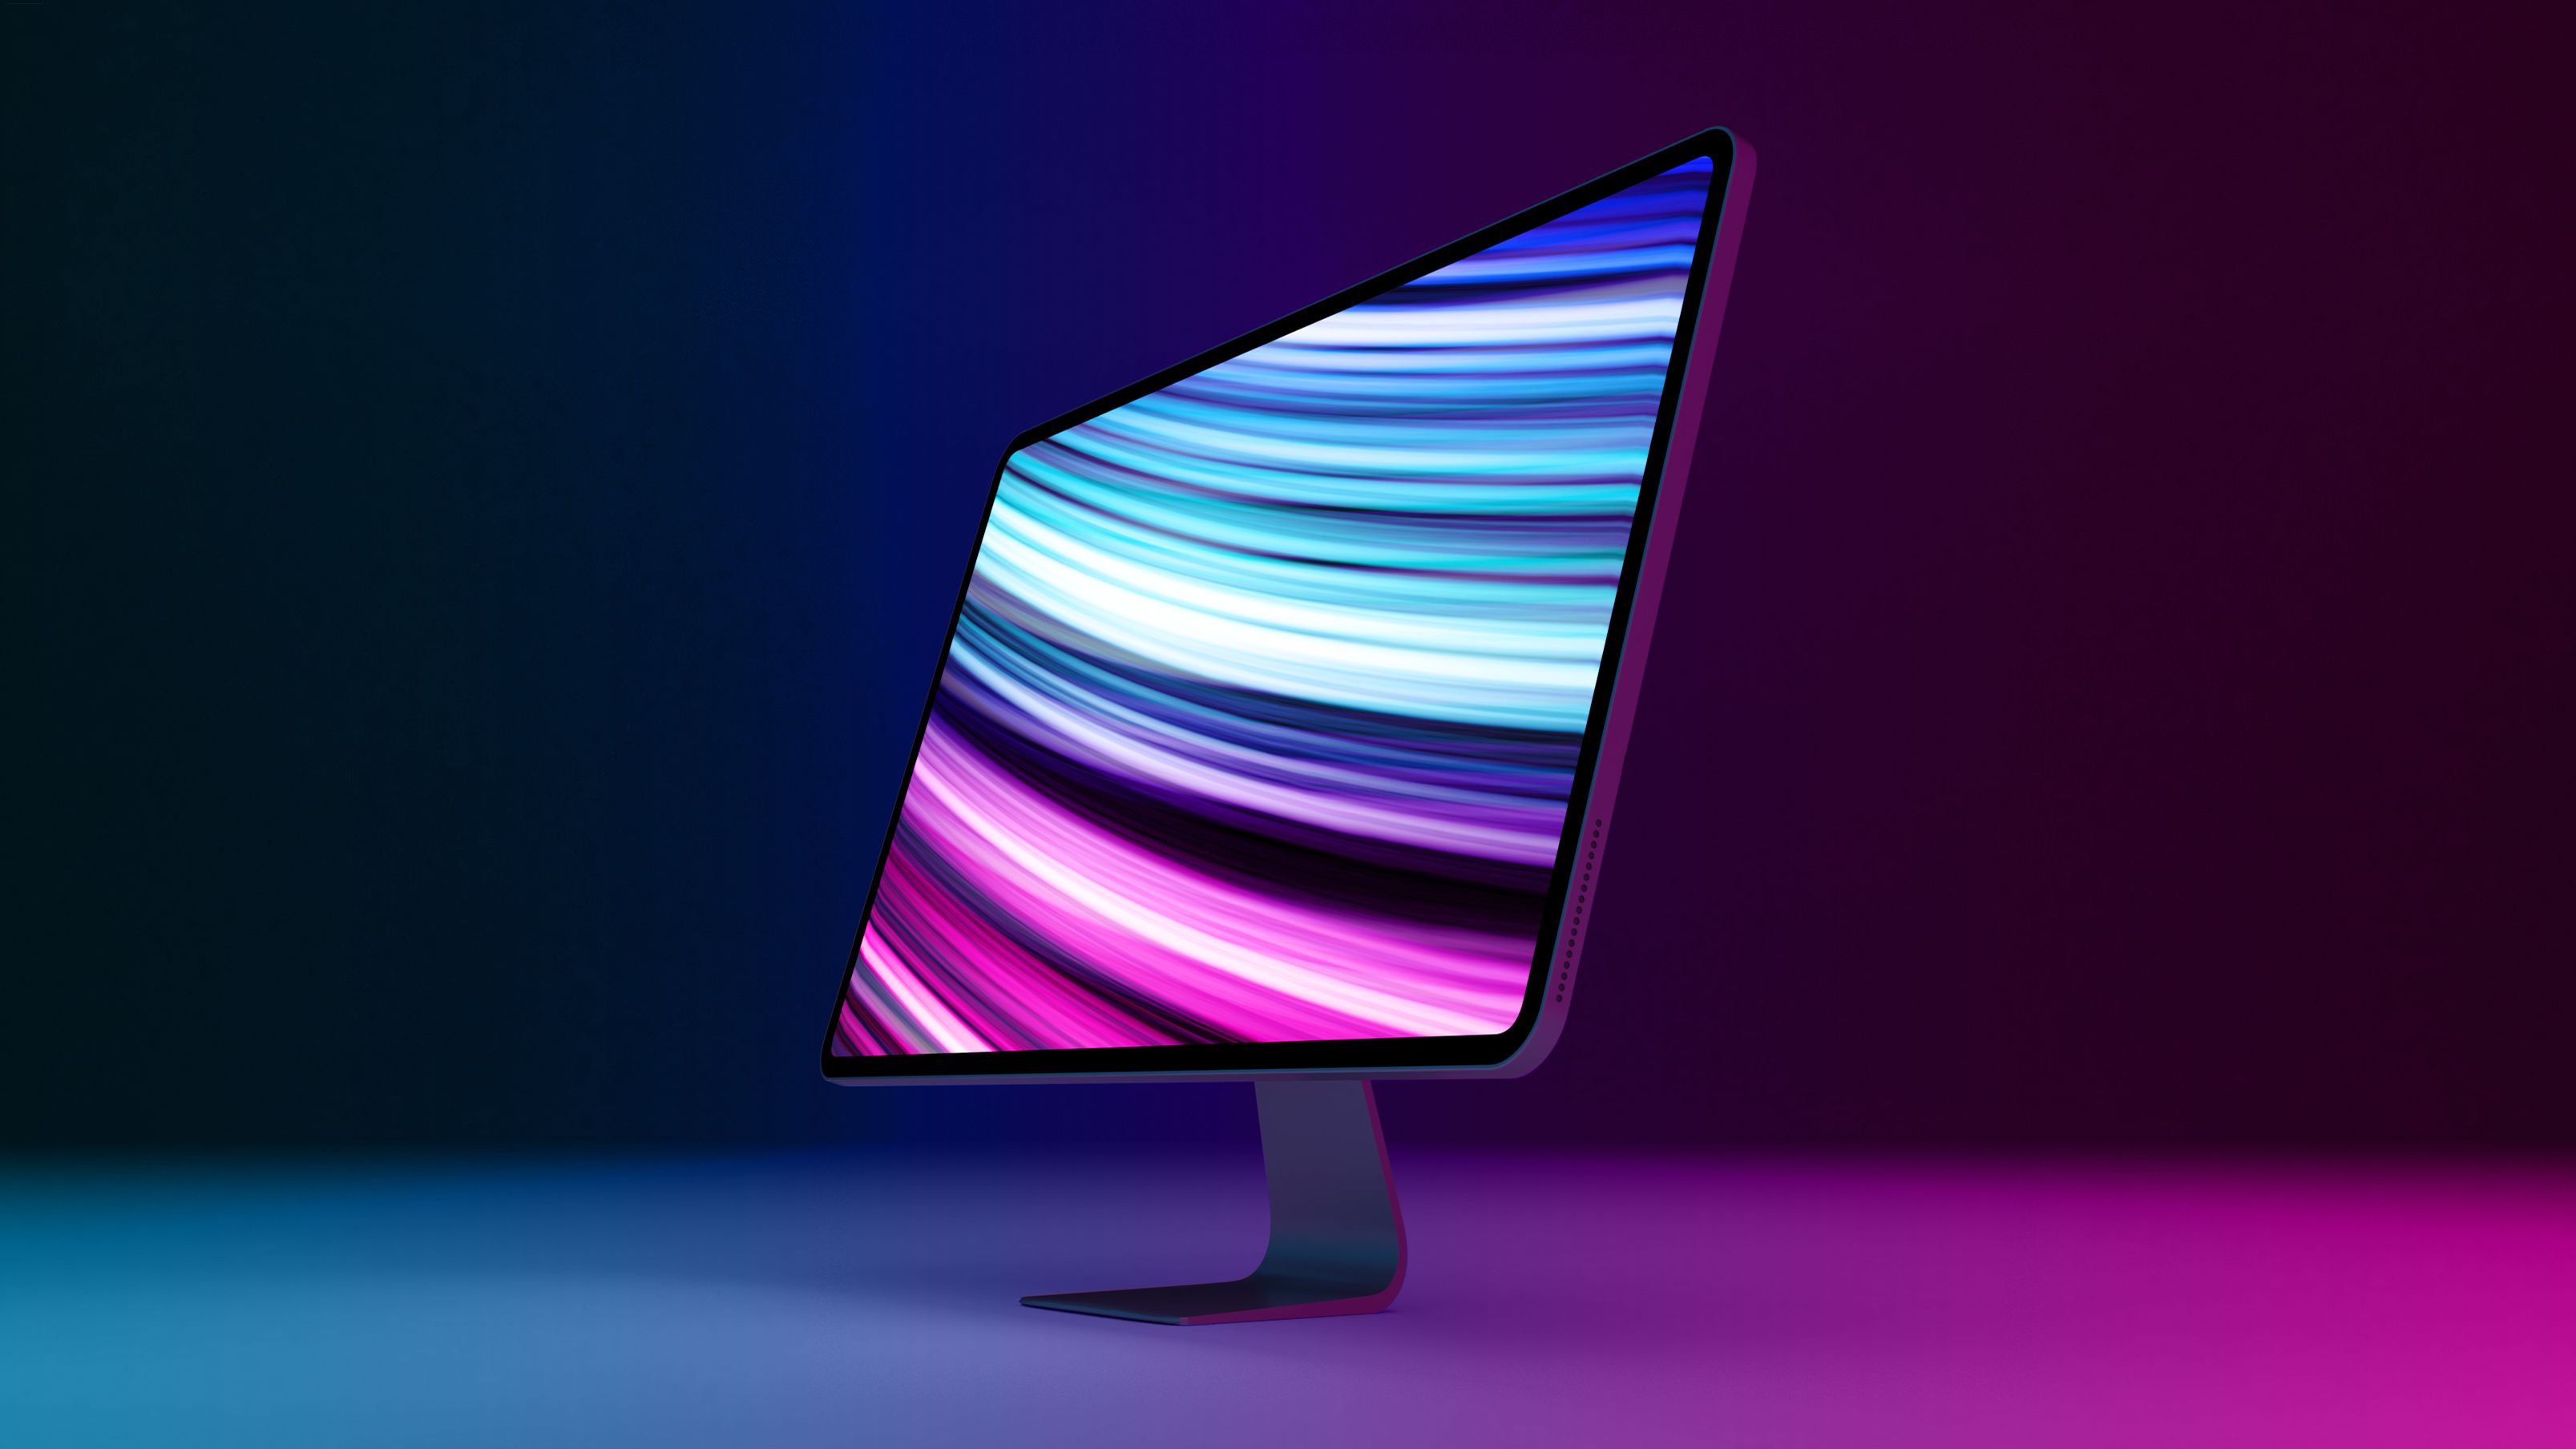 Apple's New Standalone Monitor Could Be Around Half the Price of the Pro Display XDR